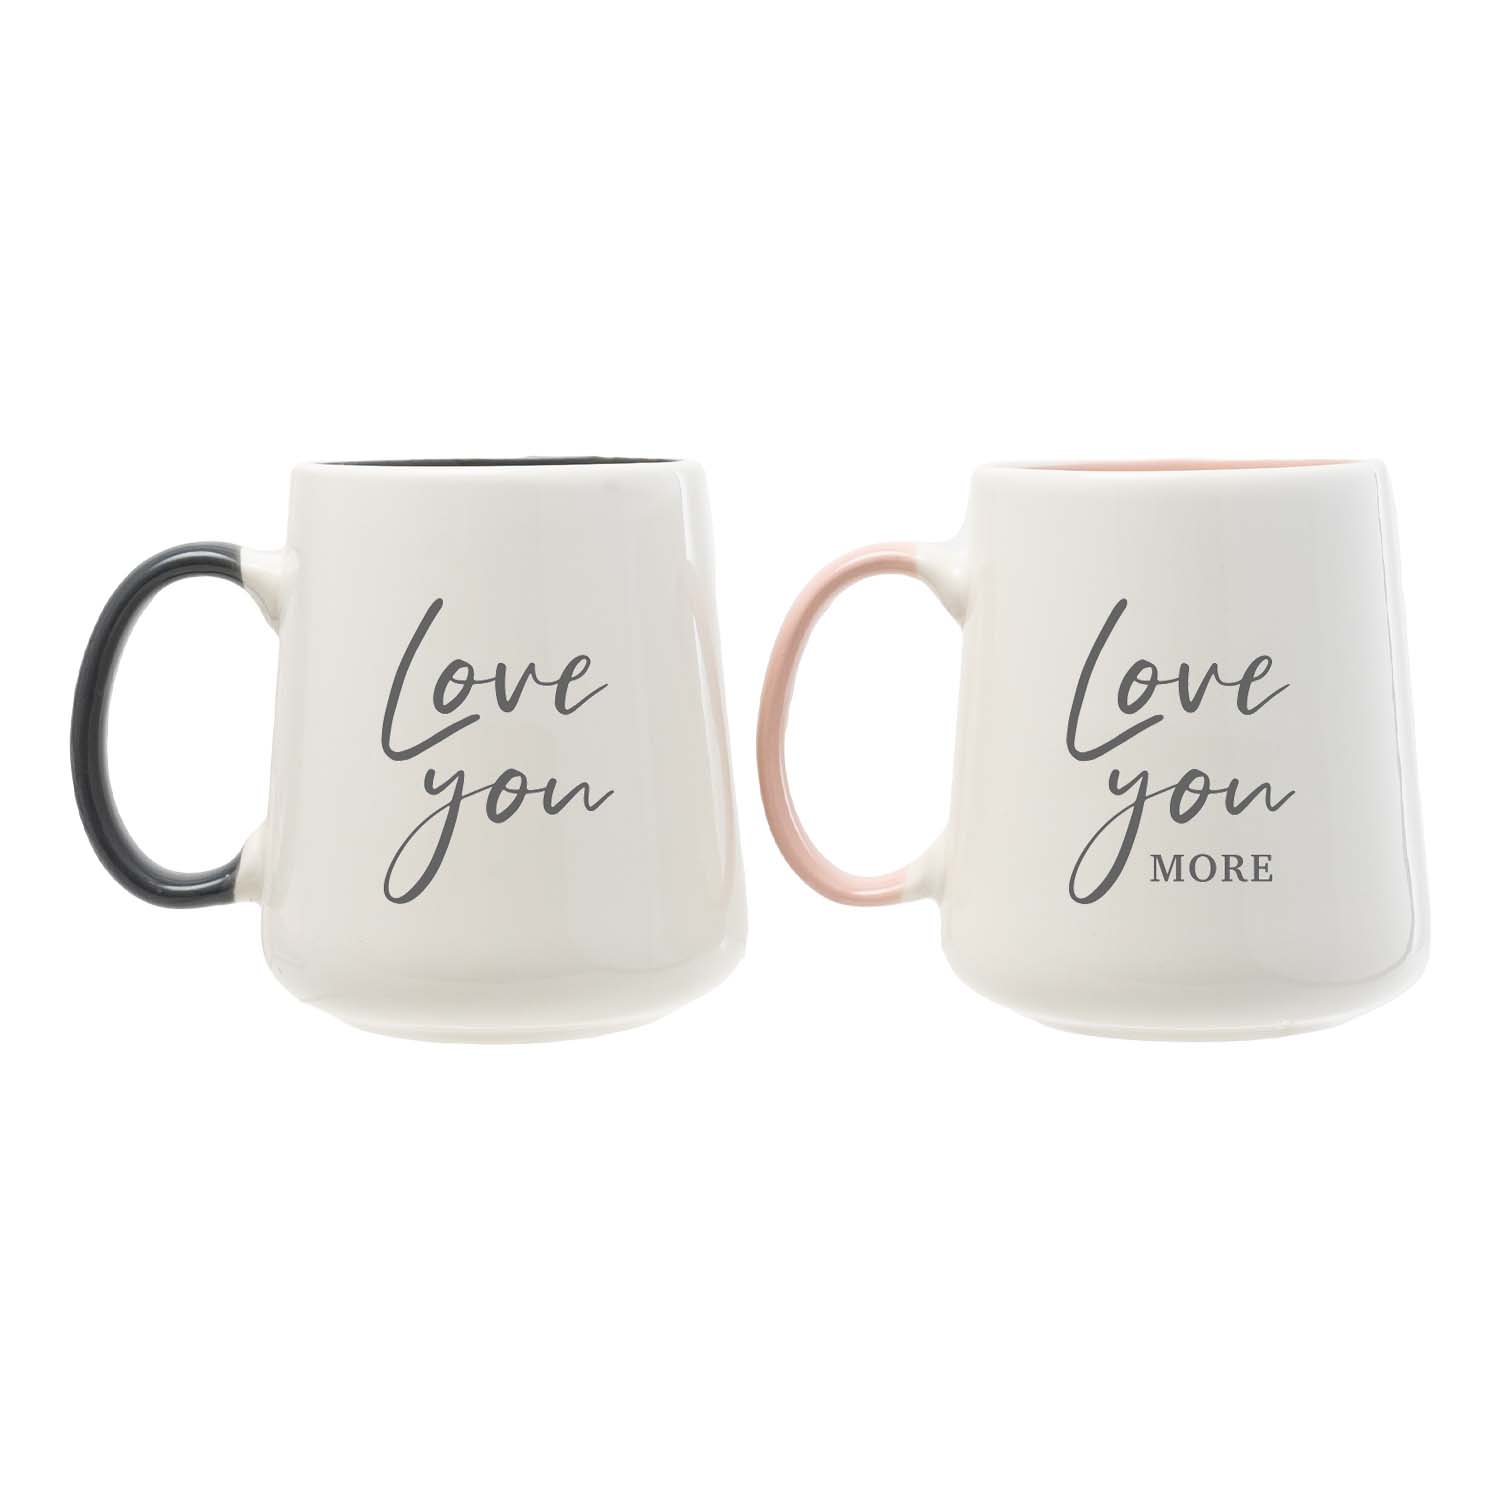 Celebrate love in style with this 'Love You' Mug from the Splosh Wedding Range. Get them a gift they will use and cherish with these wedding mugs. 